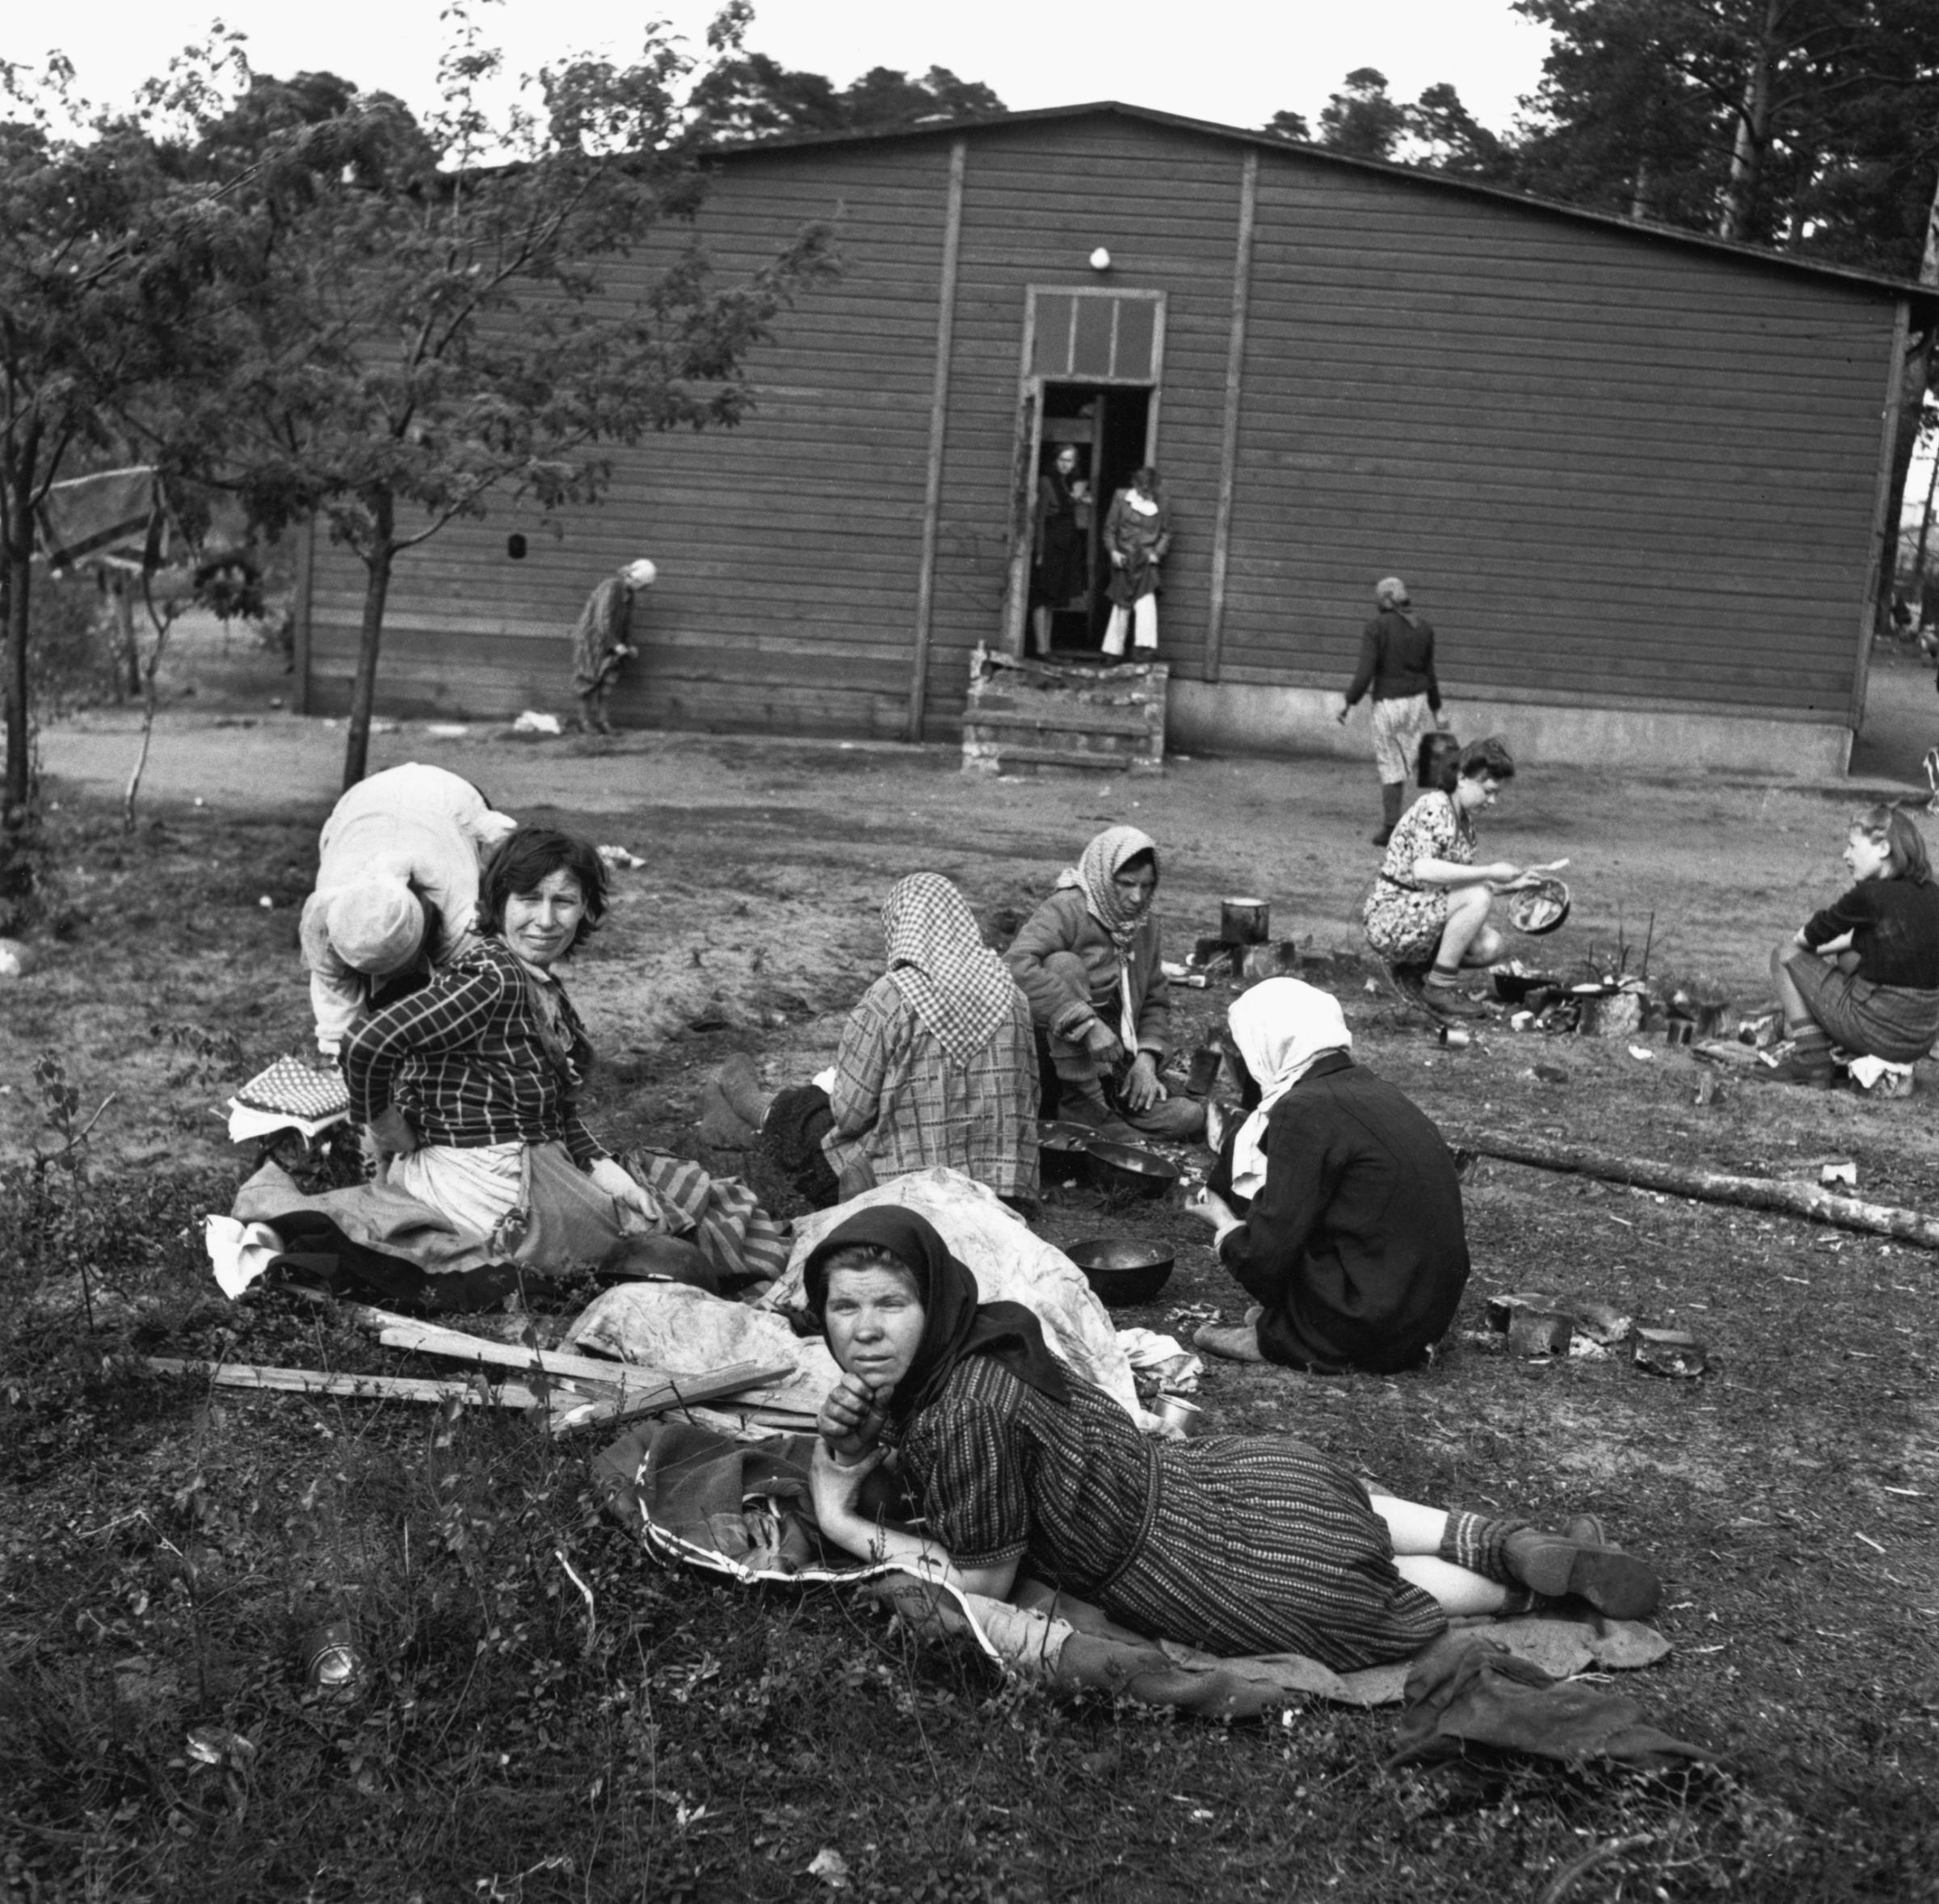 A group of women at the liberated Bergen-Belsen concentration camp in Lower Saxony during World War II, 1945.